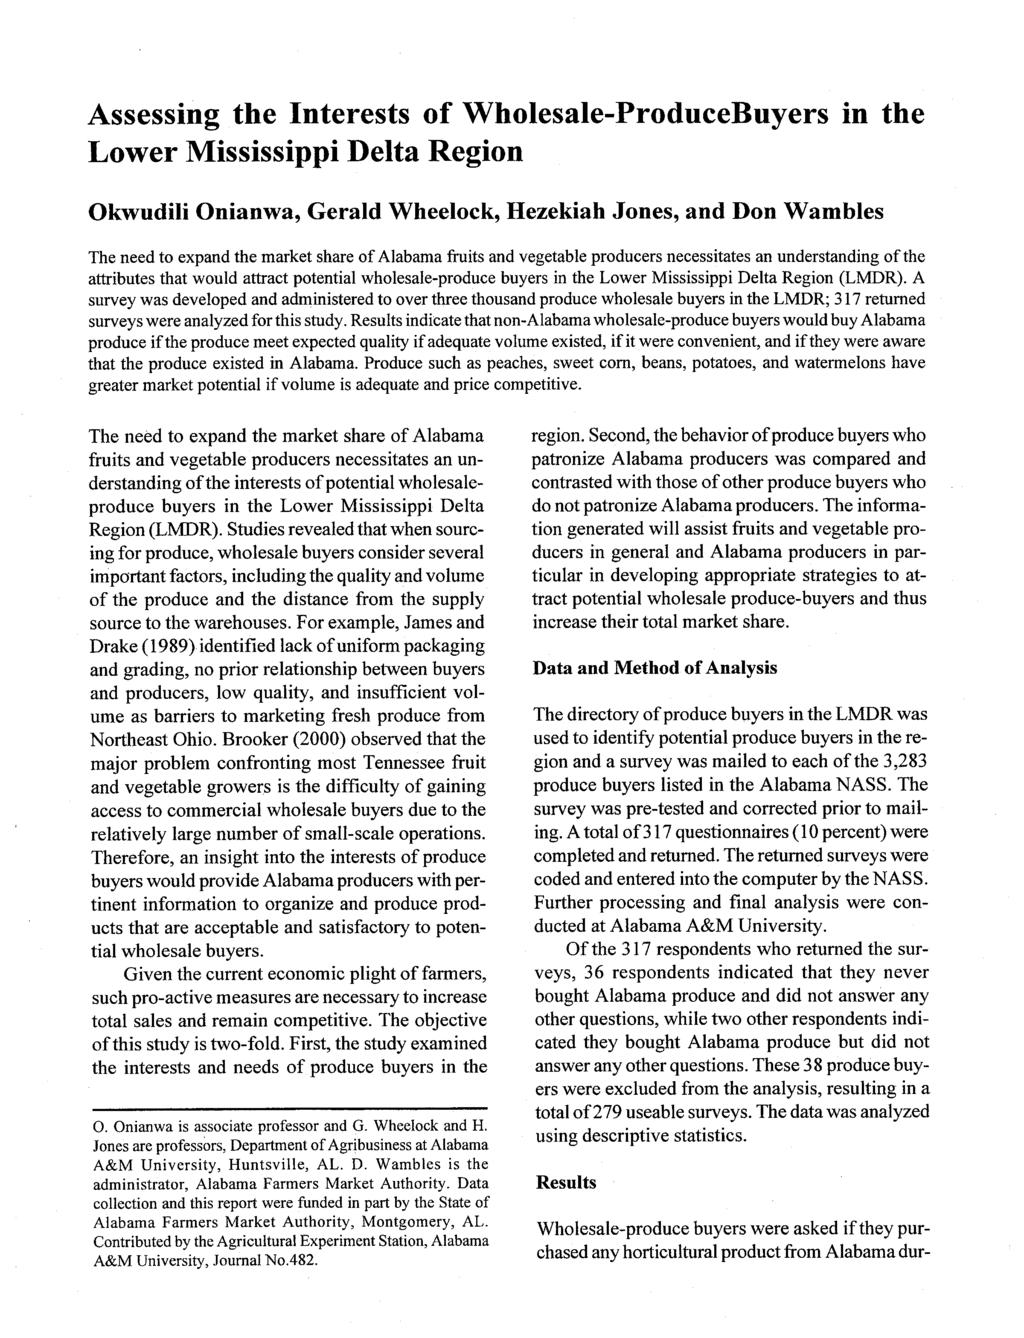 Assessing the Interests of Wholesale-ProduceBuyers in the Lower Mississippi Delta Region Okwudili Onianwa, Gerald Wheelock, Hezekiah Jones, and Don Wambles The need to expand the market share of